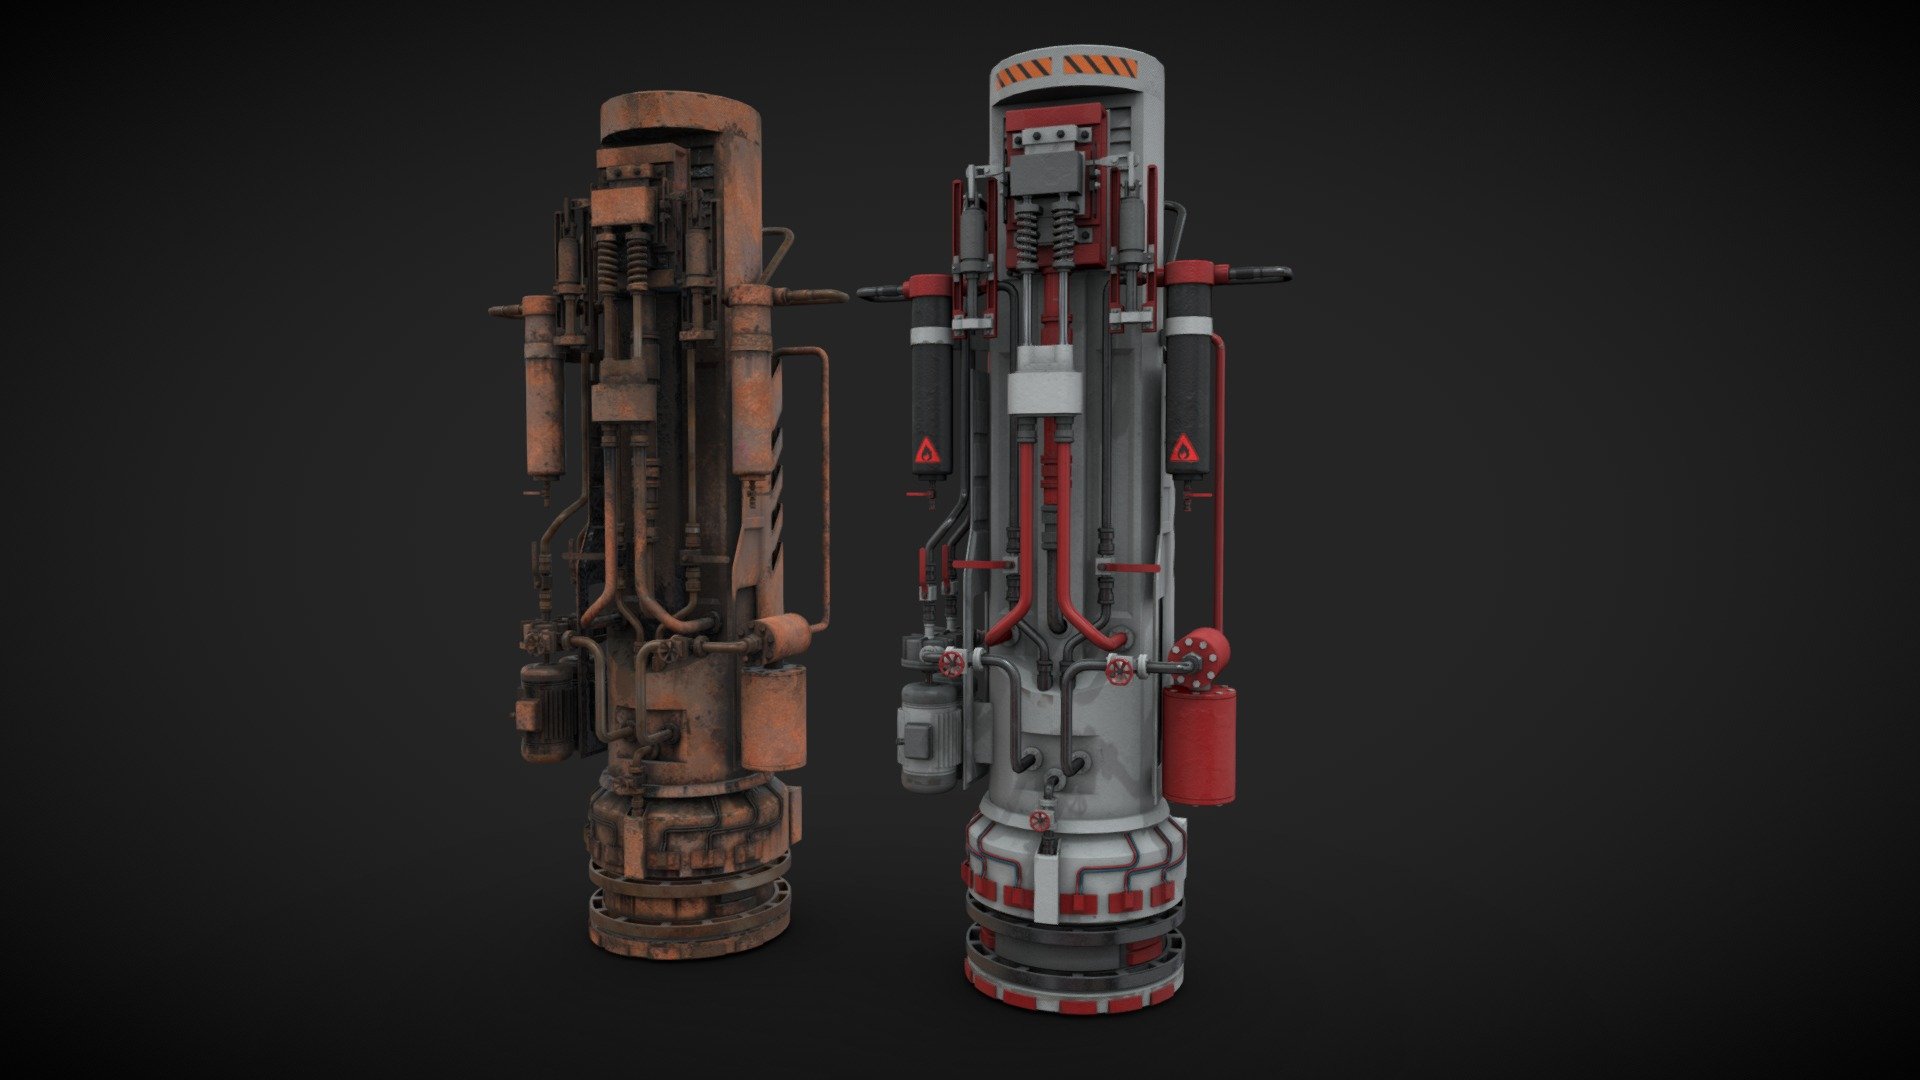 Machinery device for industrial visualizations 

Painted and rusted 

4k PNG PBR textures included 

Non overlapping UVs 3d model